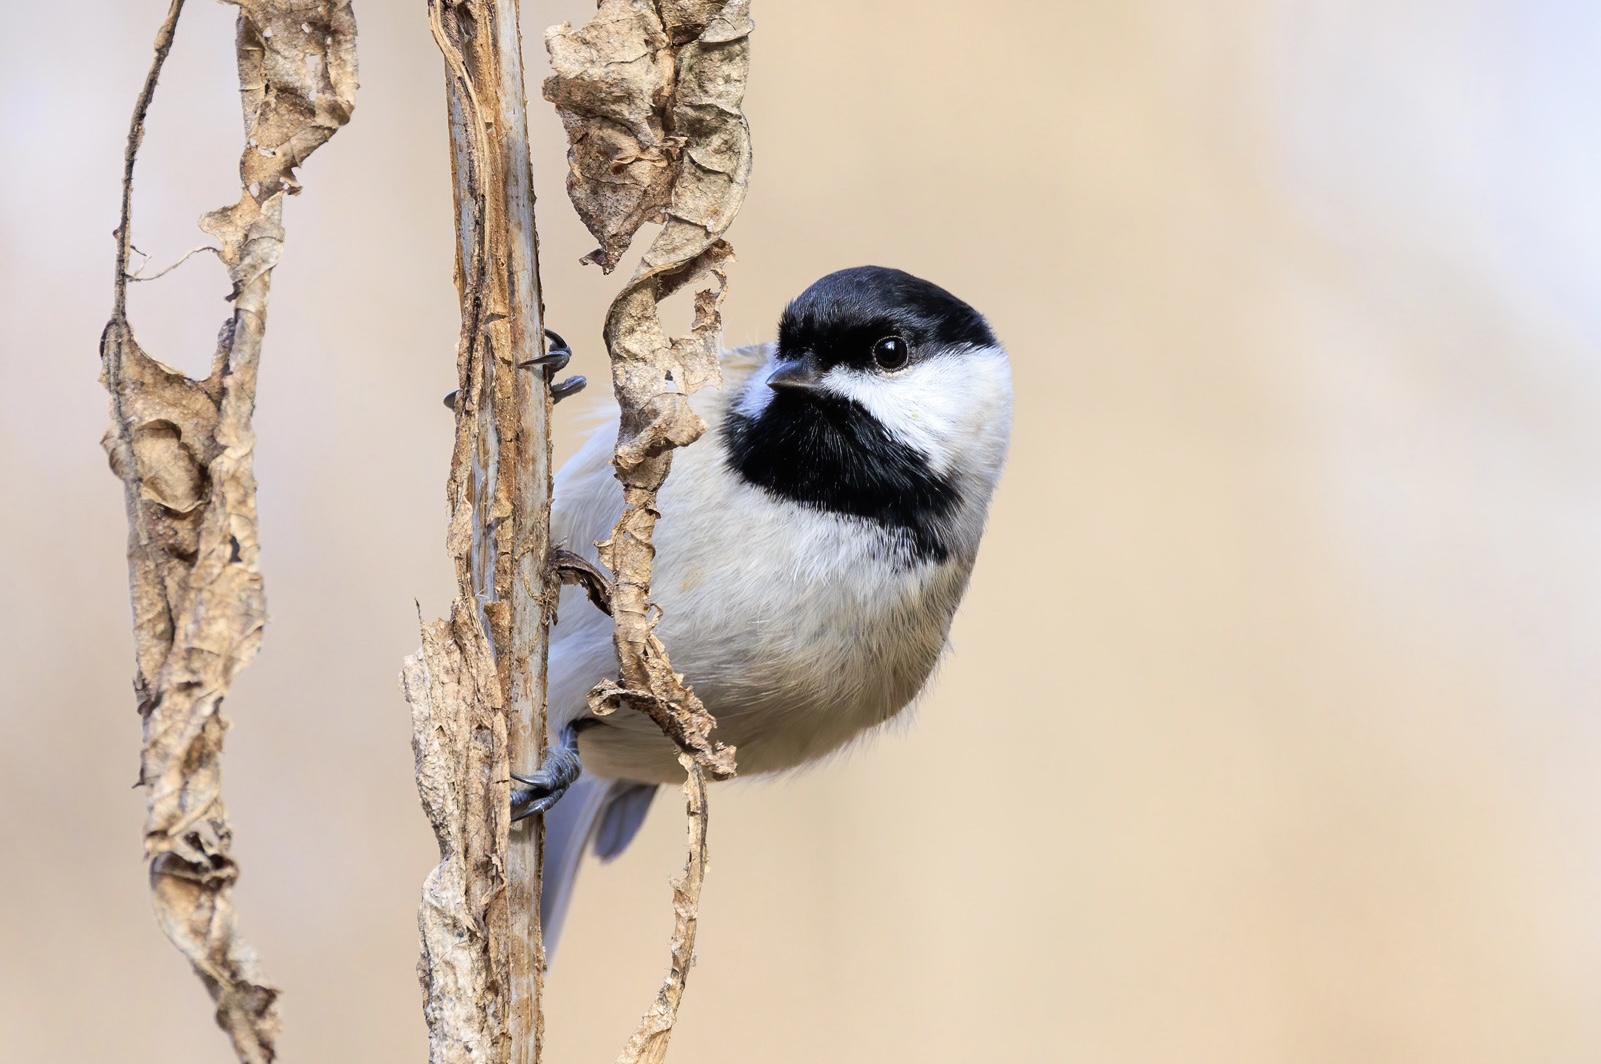 A small light colored bird with a black and white marked head sits vertically perched on a dried up flower stem. 